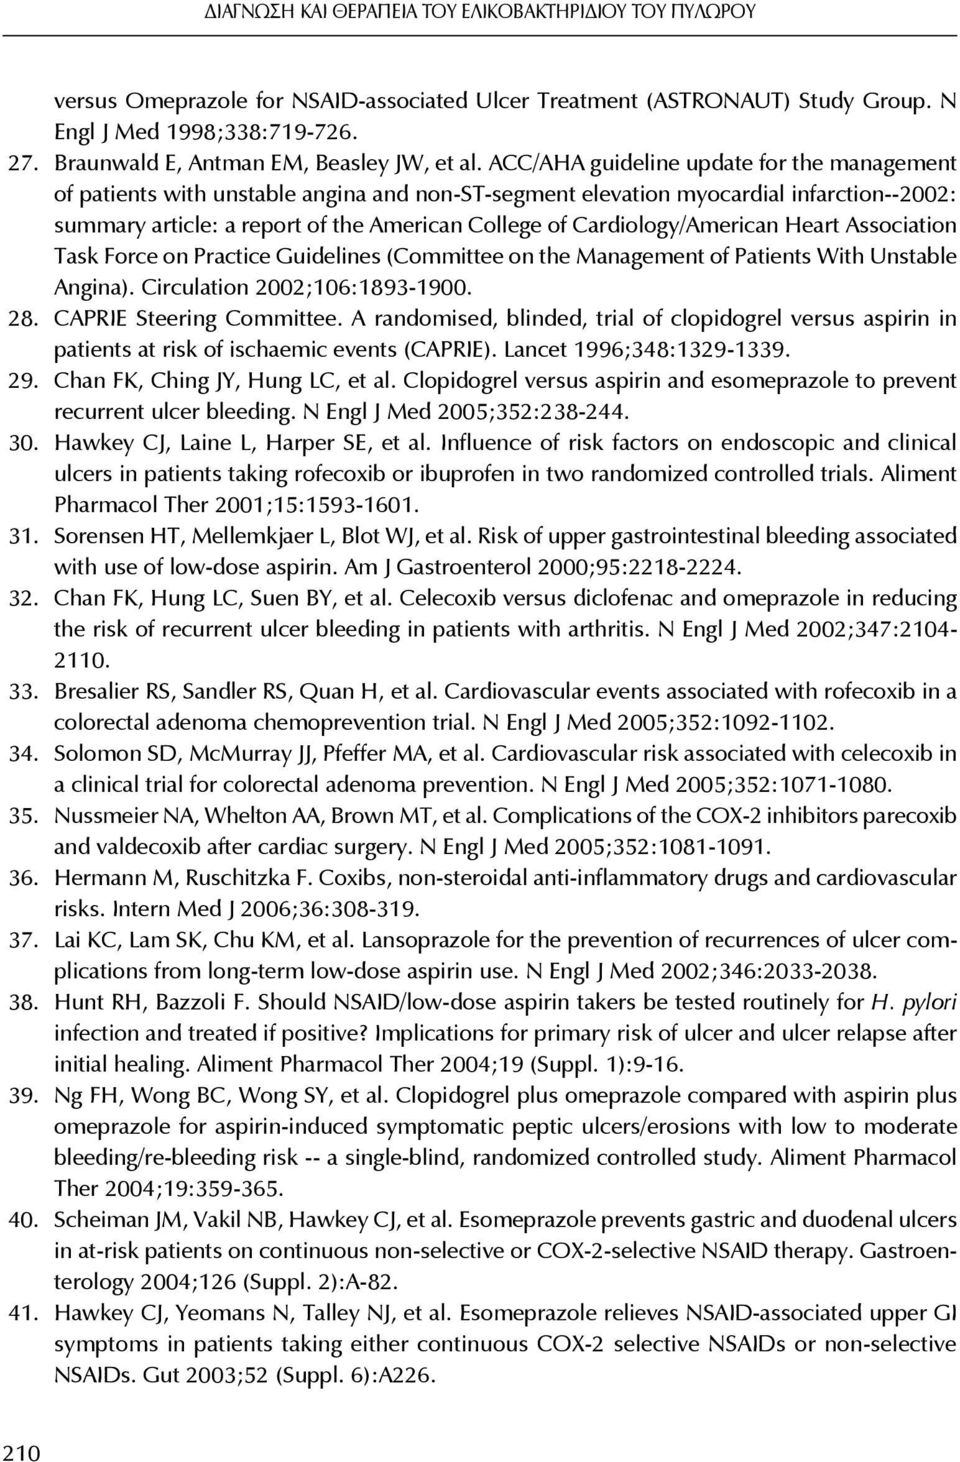 ACC/AHA guideline update for the management of patients with unstable angina and non-st-segment elevation myocardial infarction--2002: summary article: a report of the American College of